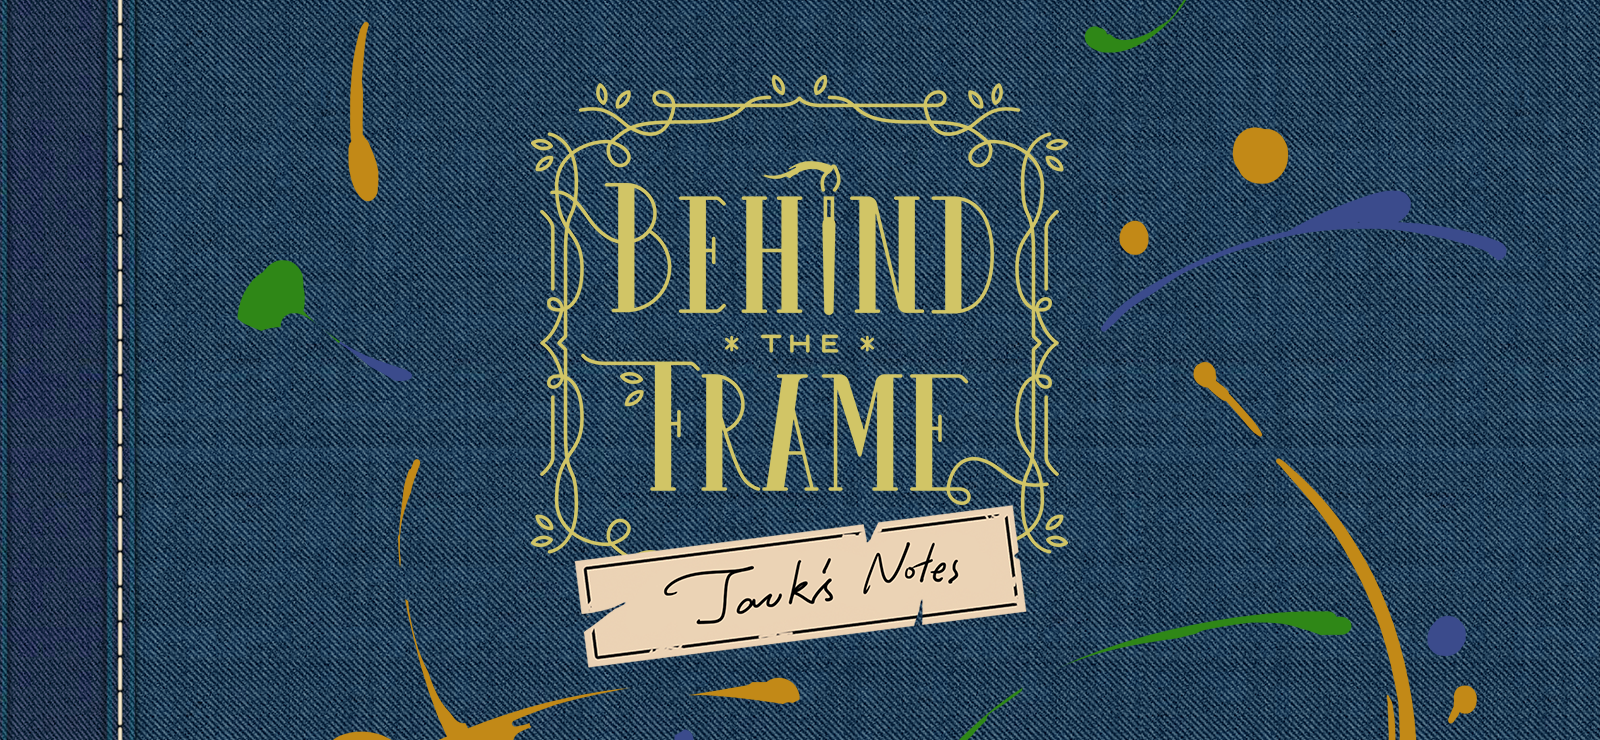 Behind The Frame: The Finest Scenery - Art Book #2